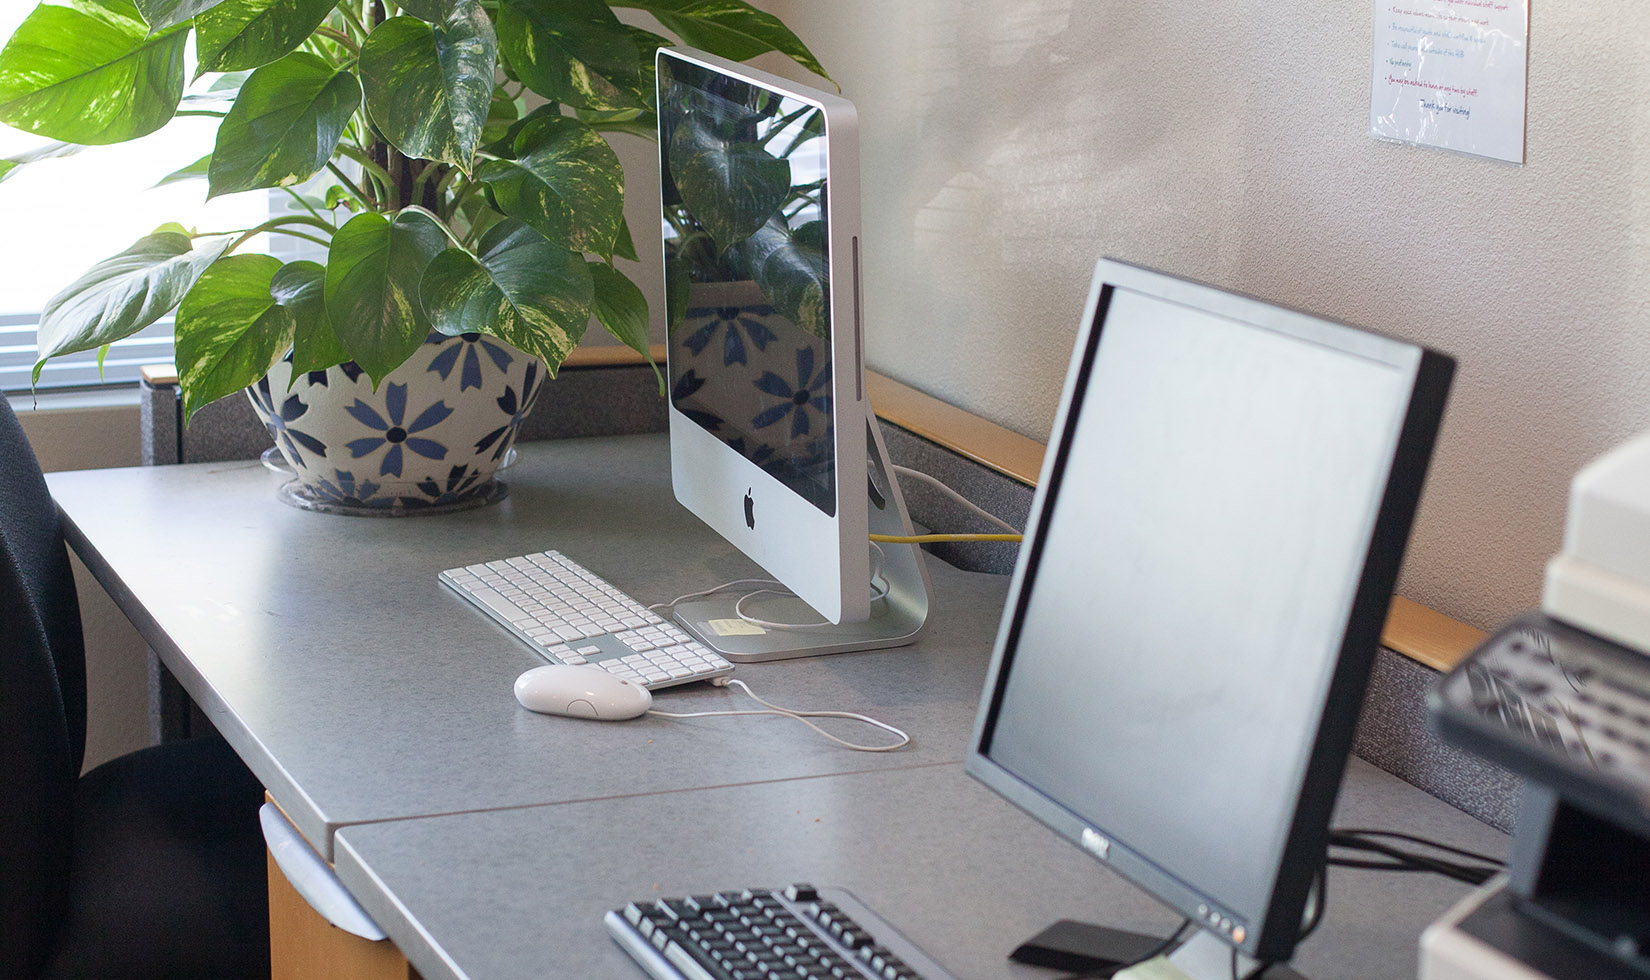 iMac and PC on desk with green plant in background